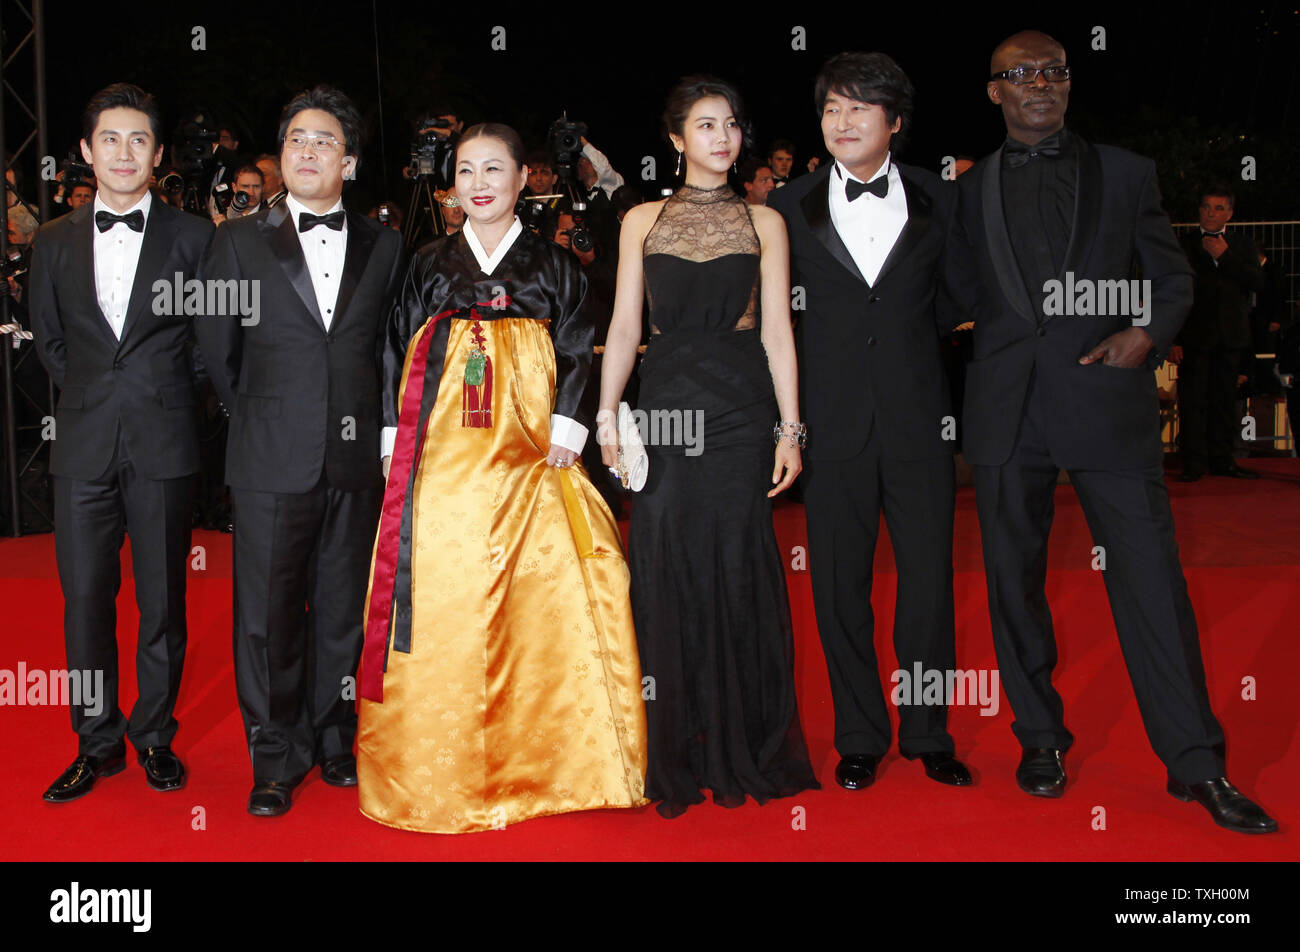 (From L to R) Director Chan-Wook Park, actors Kim Ok-Vin, Kim Hae-Sook, Song Kang-Ho, Shin Ha-Kyun and Eriq Ebouaney arrive on the red carpet before a screening of the film 'Thirst' at the 62nd annual Cannes Film Festival in Cannes, France on May 15, 2009.   (UPI Photo/David Silpa) Stock Photo